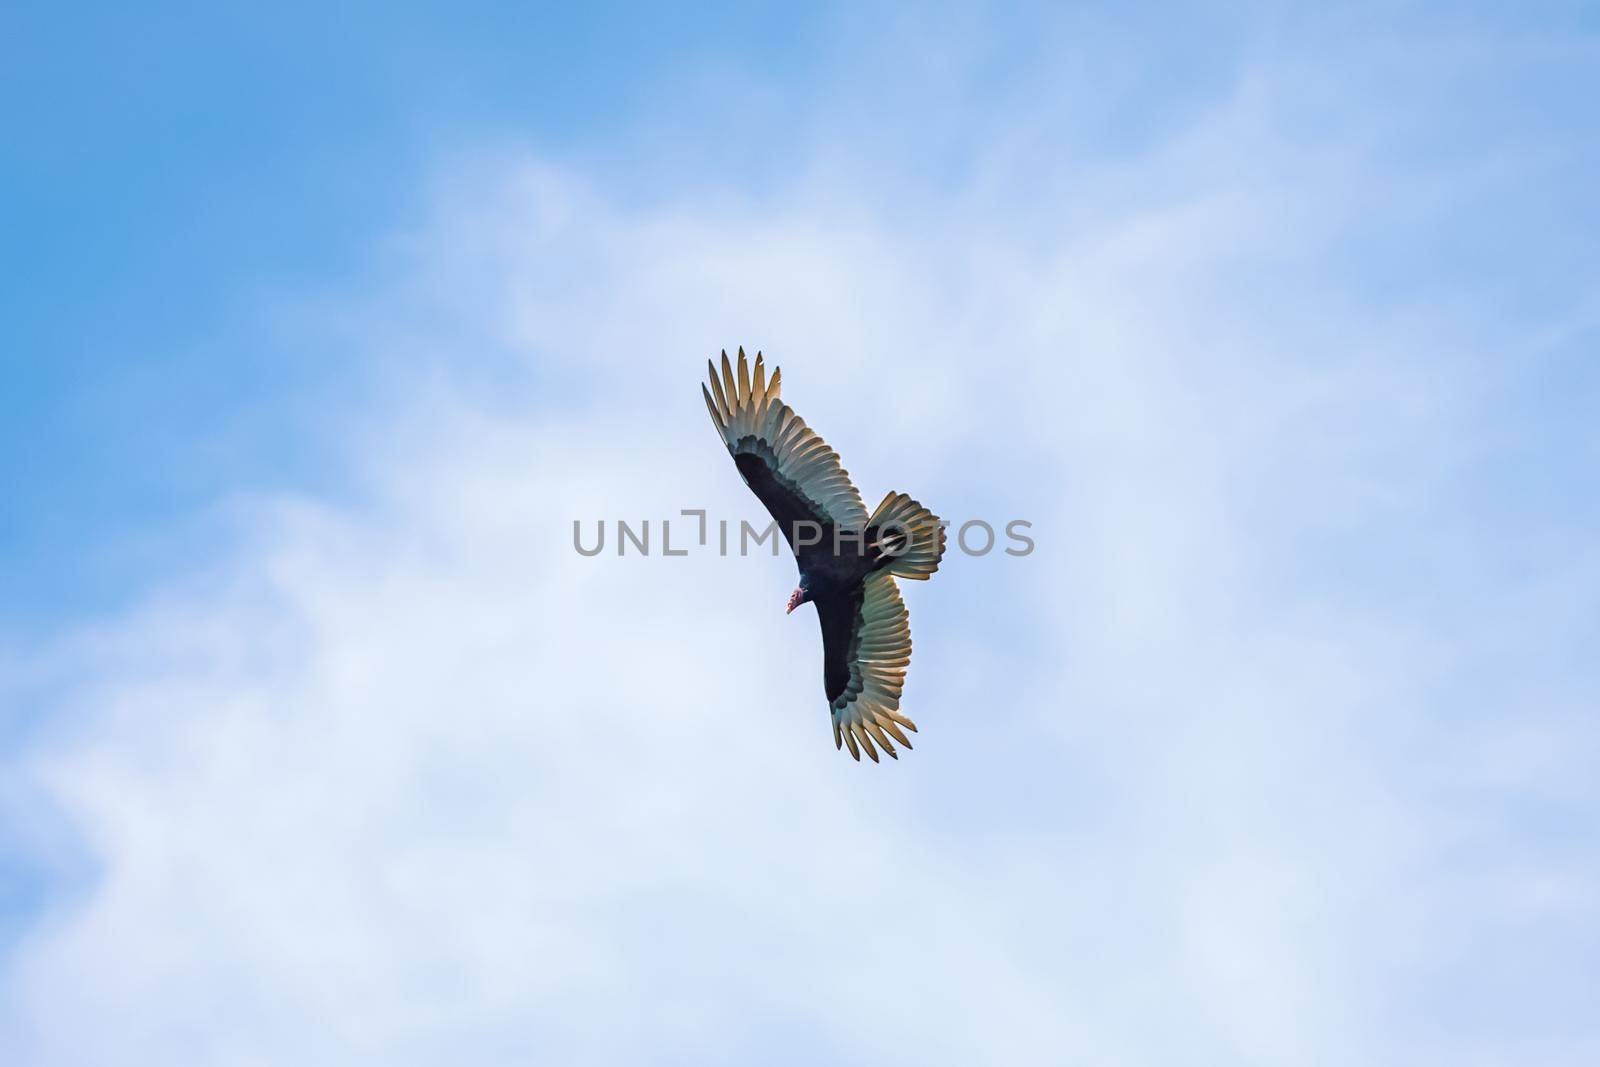 in the blue sky, an eagle soars with its wings spread wide at the height of the clouds